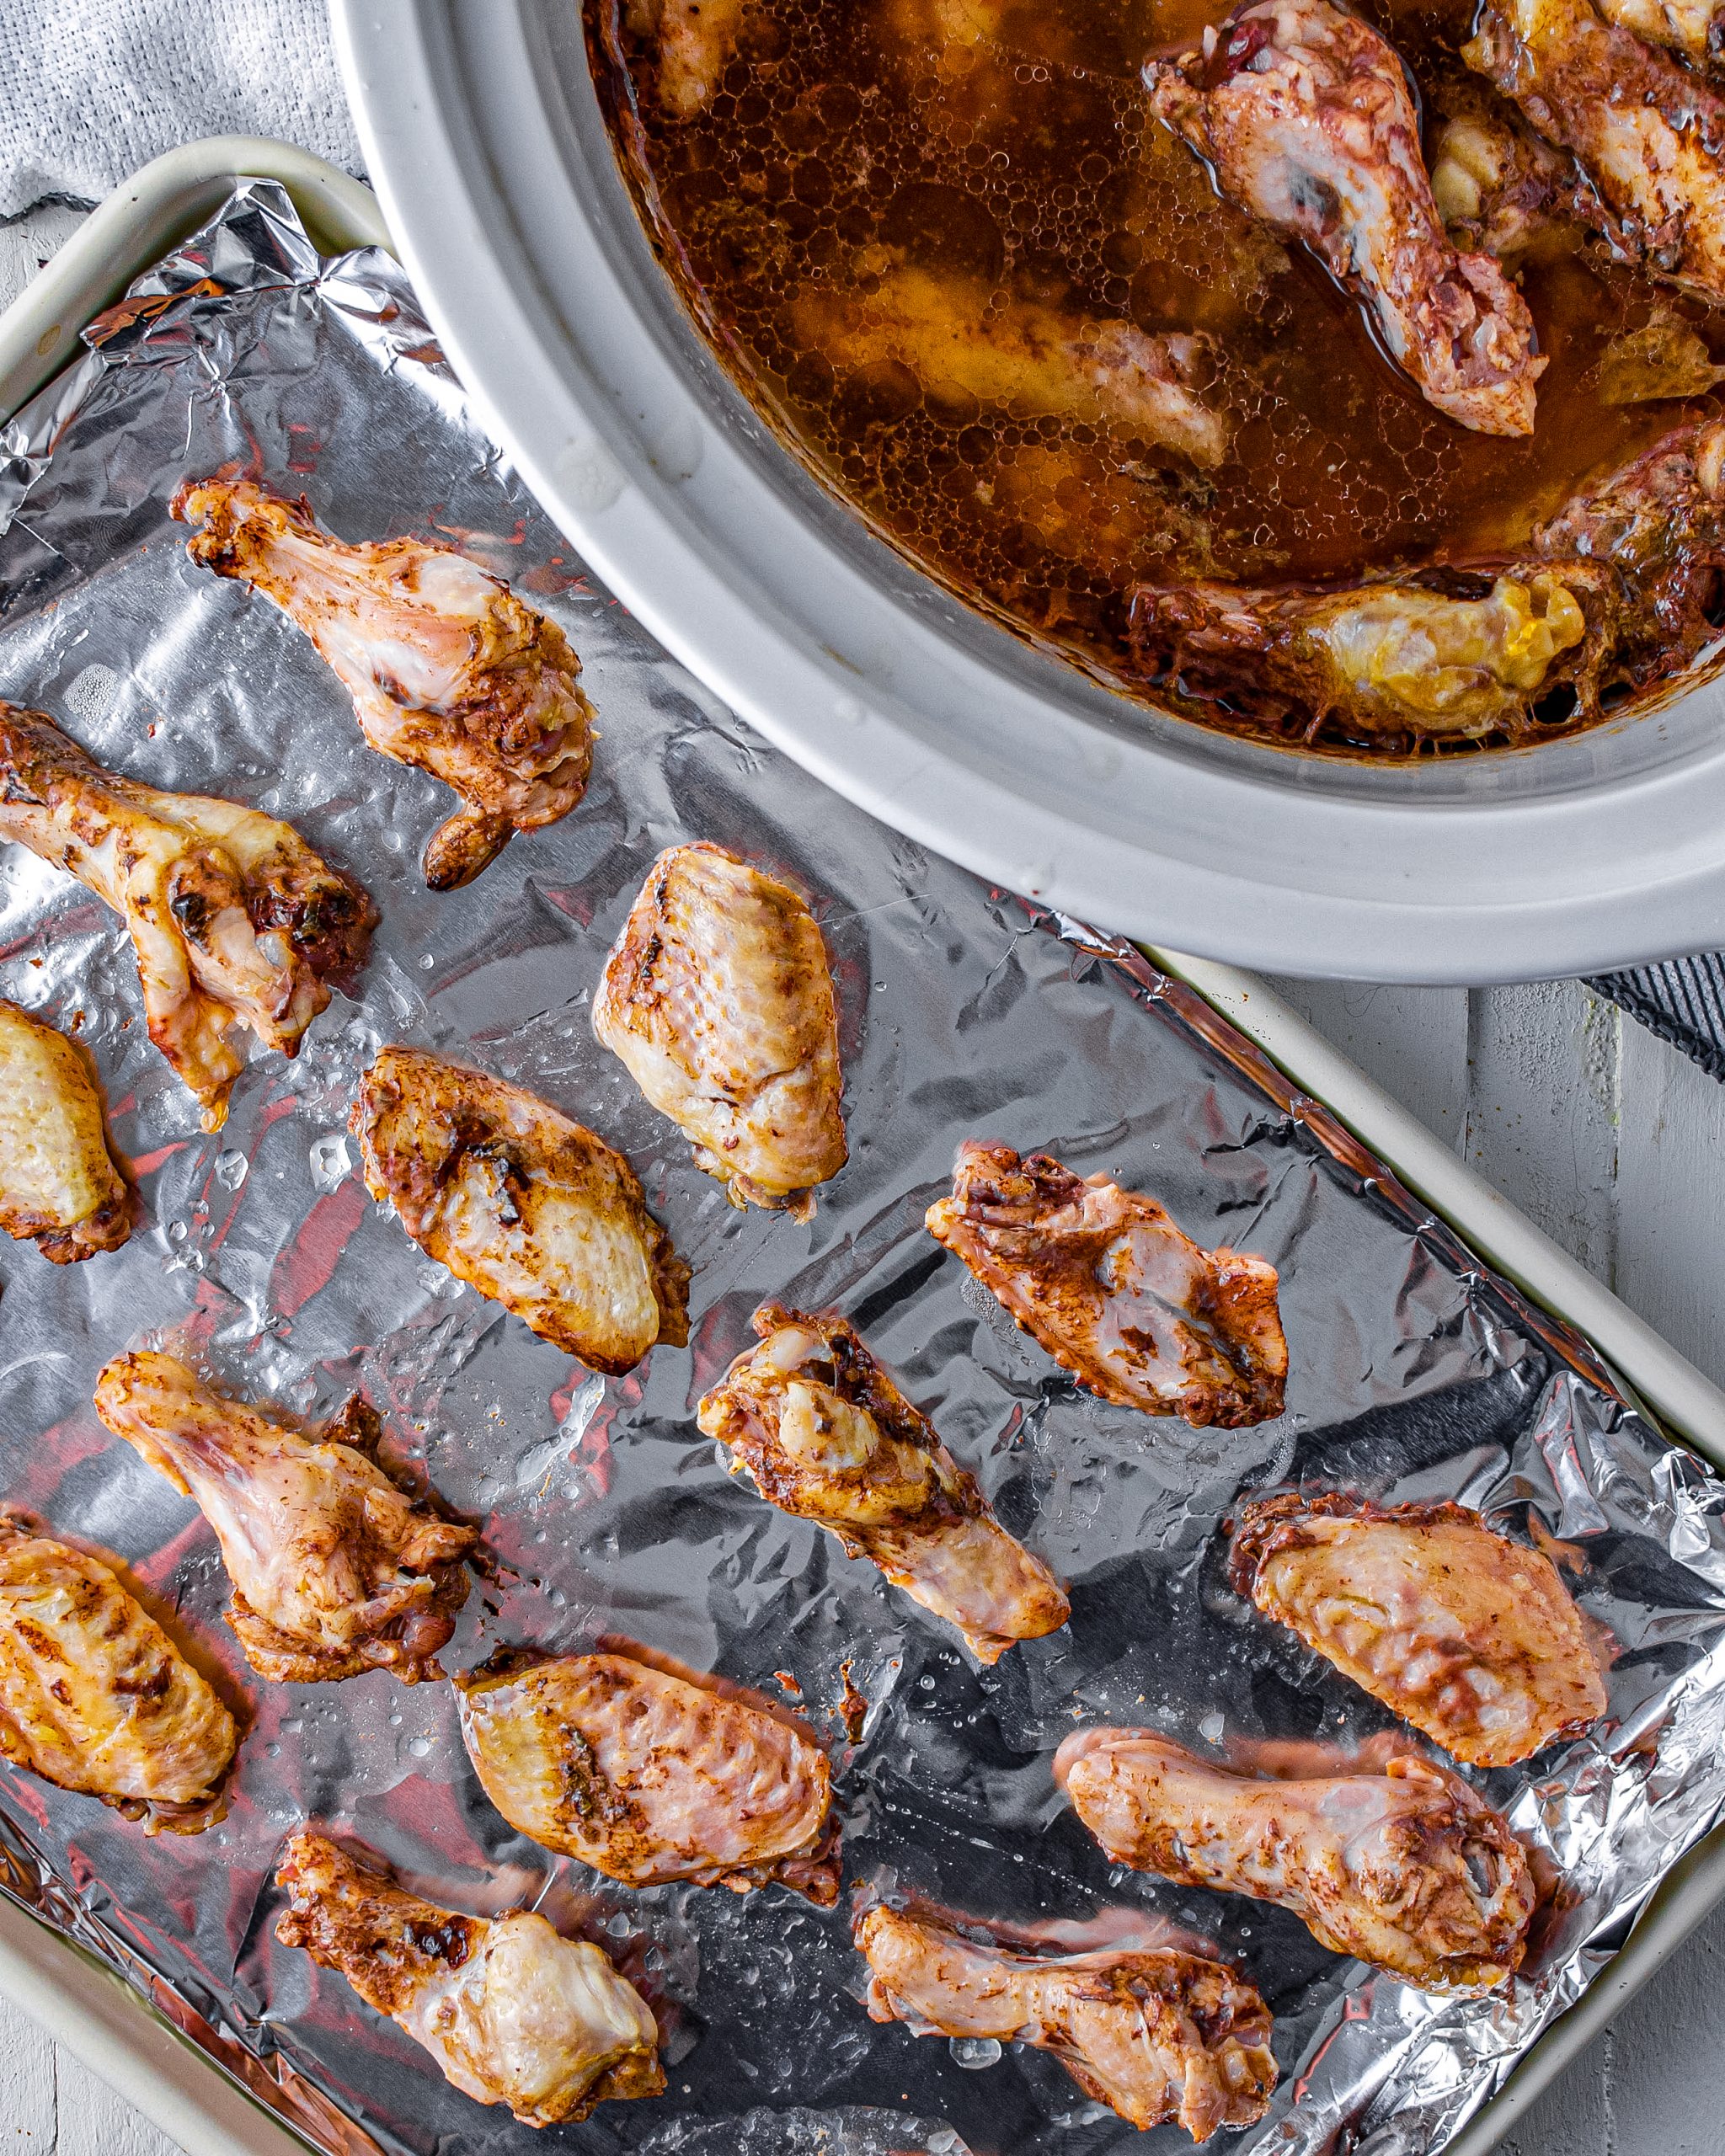 When finished in the slow cooker, place the wings onto an aluminum foil-lined baking sheet. 